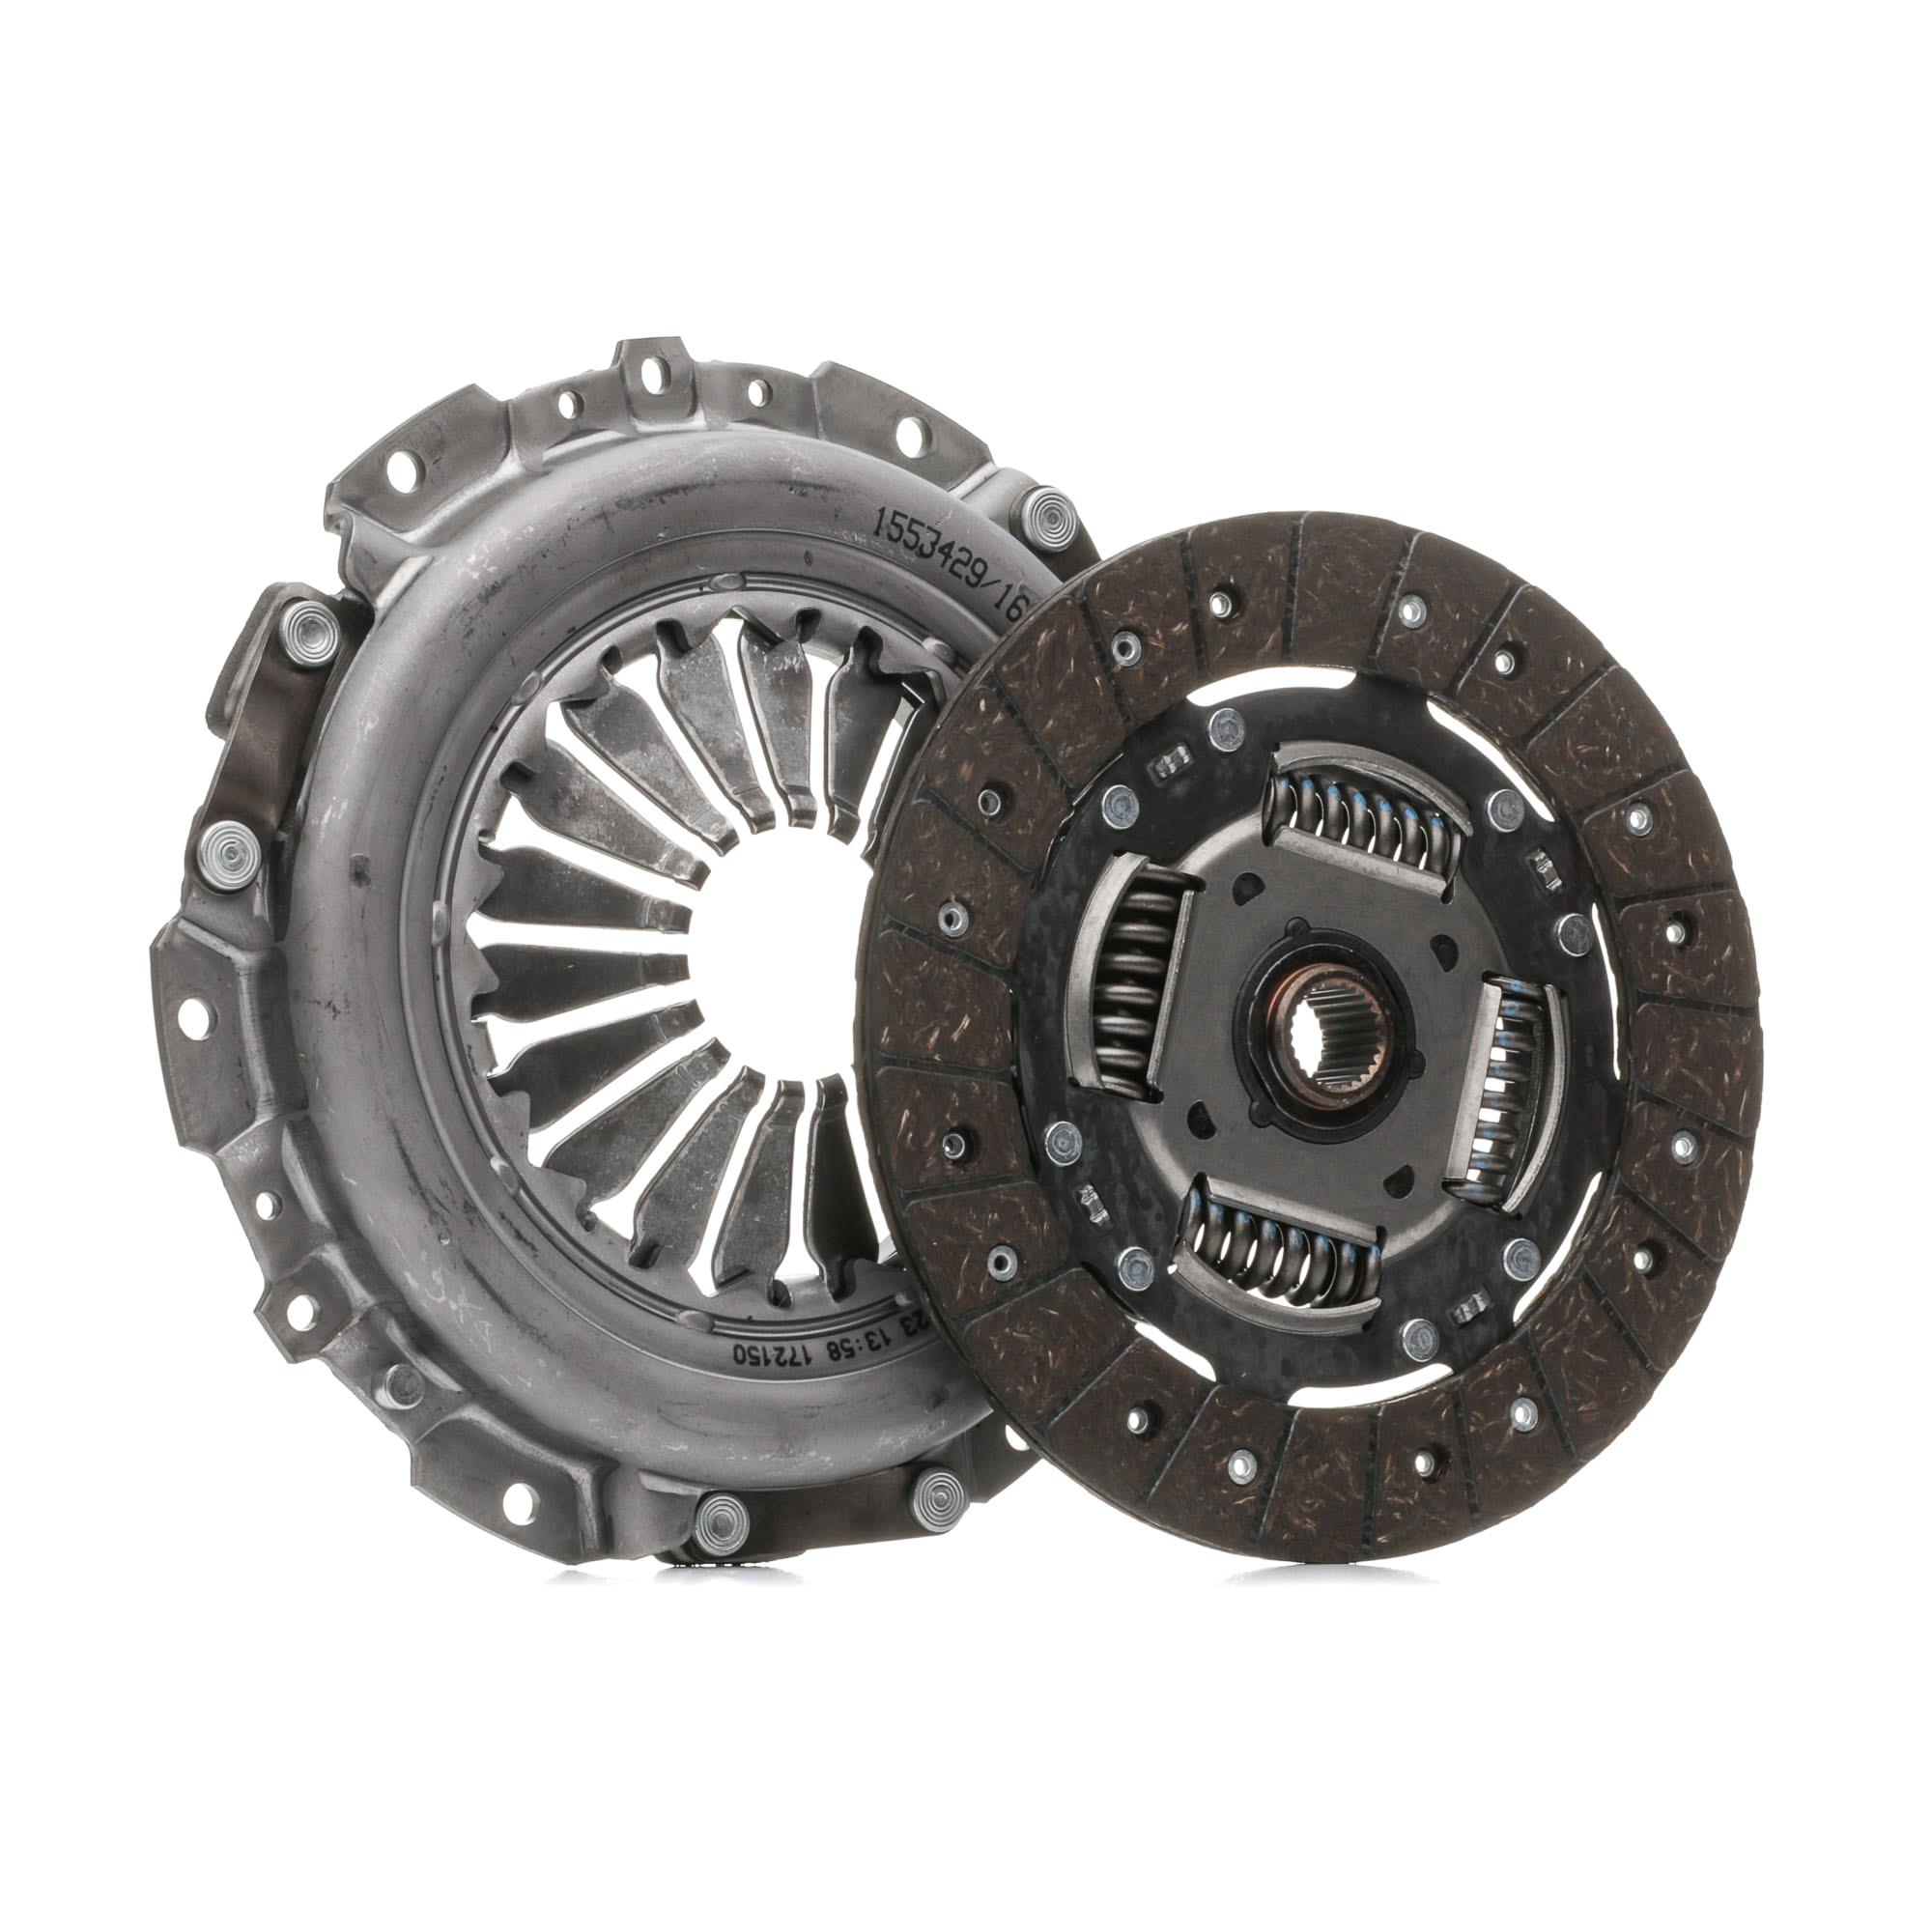 RIDEX 479C3404 Clutch kit with clutch pressure plate, with clutch disc, without clutch release bearing, 220mm